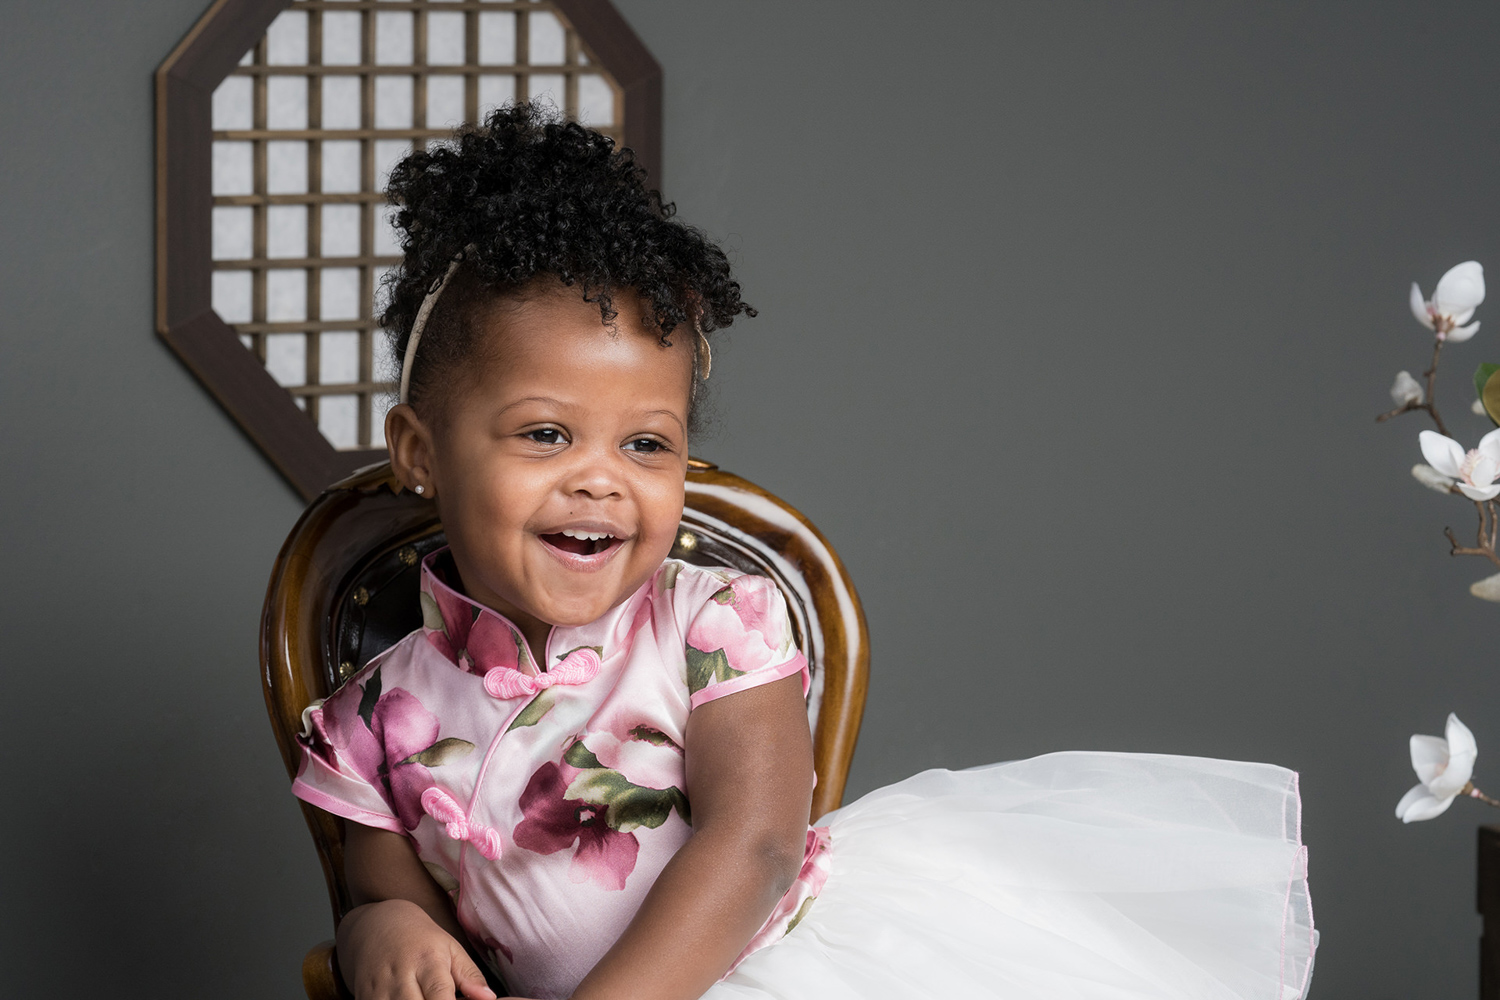 Two-year-old Sophia sits in a miniature chair and smiles during a family photoshoot.